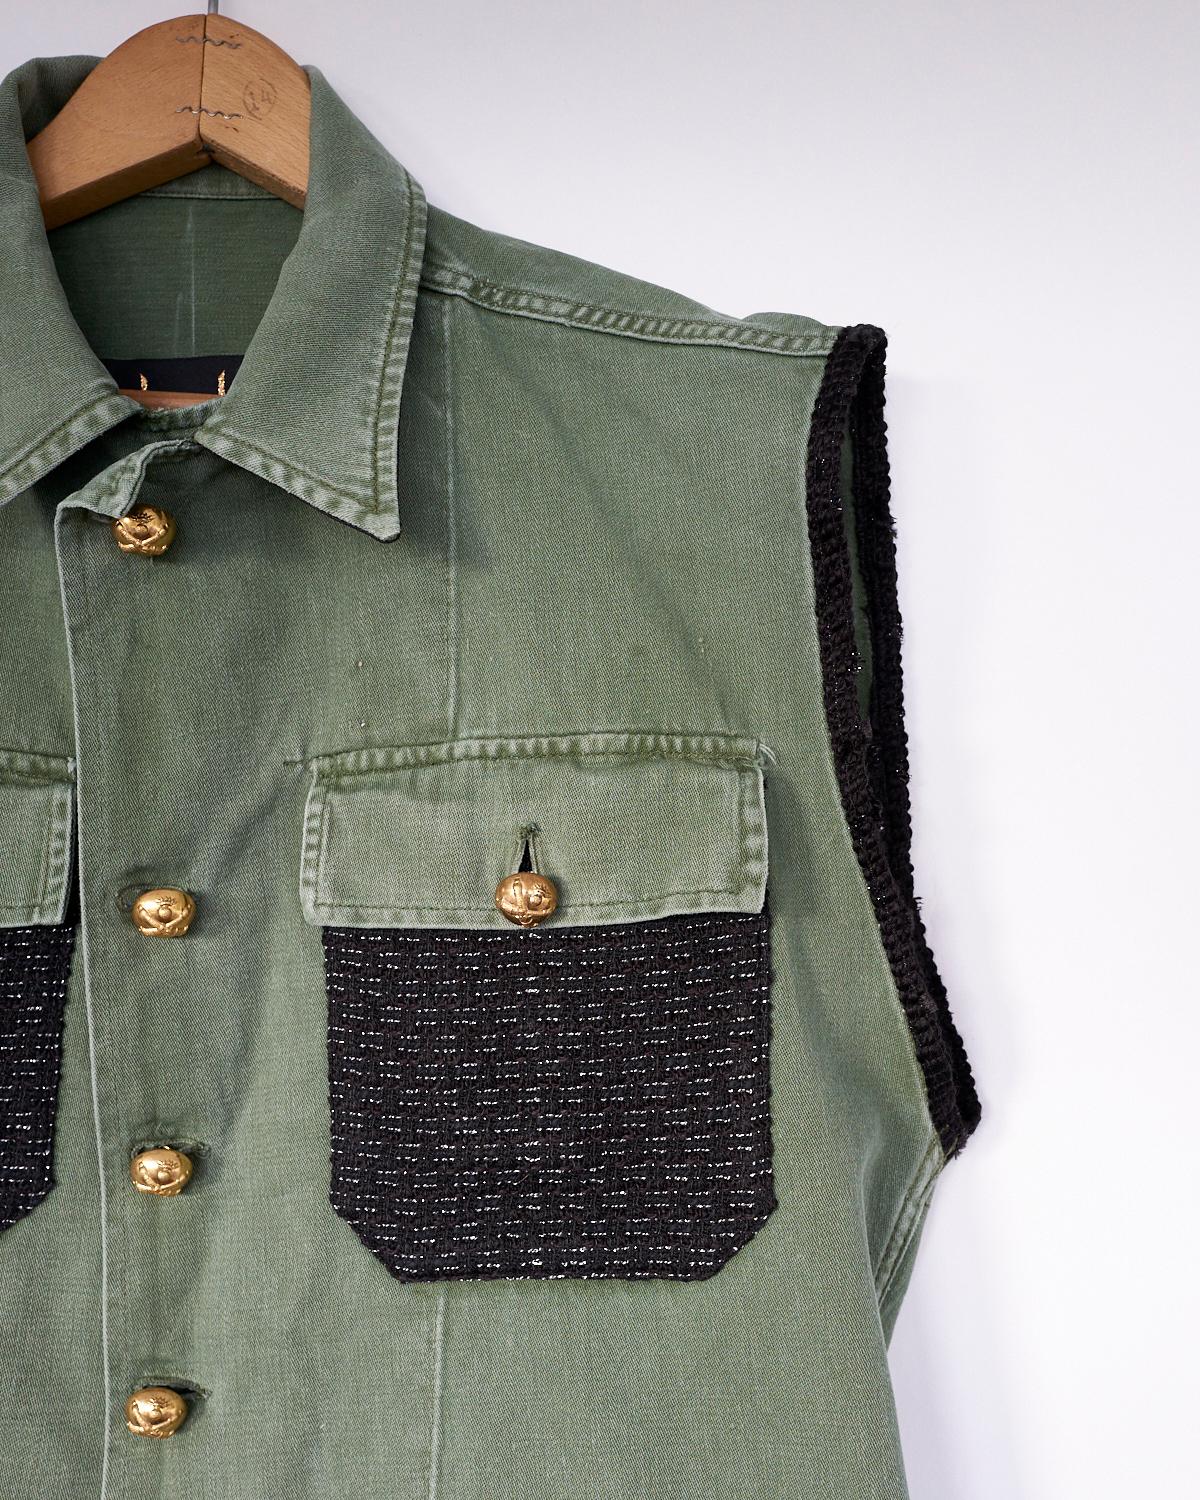 Embellished Us Vintage Military Sleeveless Jacket in Green with French Gold Bottons and Trim of Vintage Black Silver Lurex Tweed J Dauphin


Our Up-cycled Vintage Jackets are made from vintage, natural fibers, military clothing and french workwear